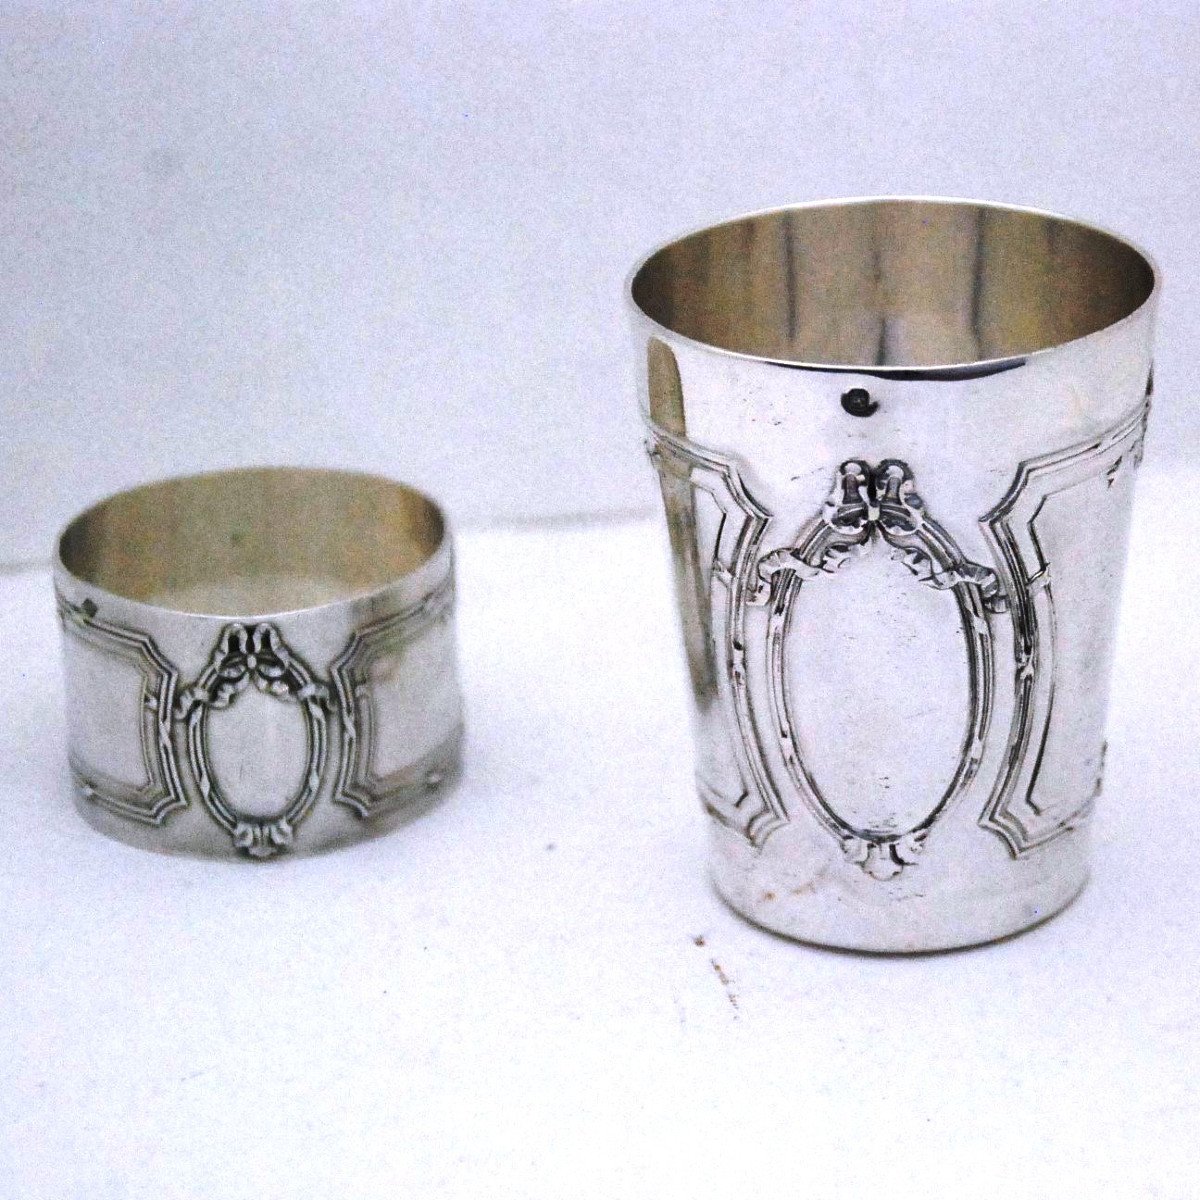 Slightly Flared Timpani And Its Solid Silver Napkin Ring